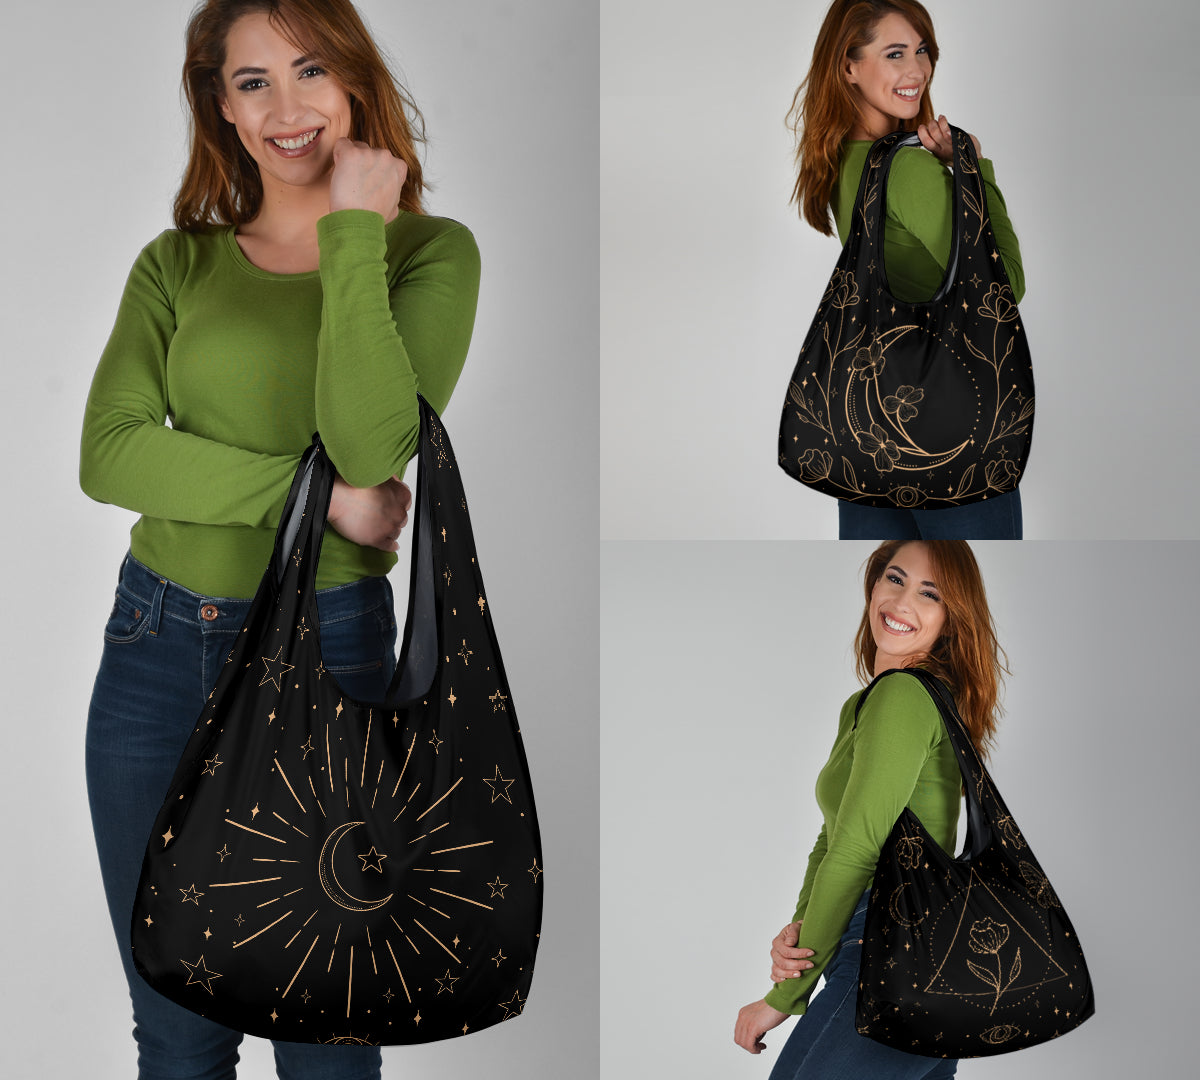 witchy tote bags, shopping bags, reusable grocery bags, eco friendly